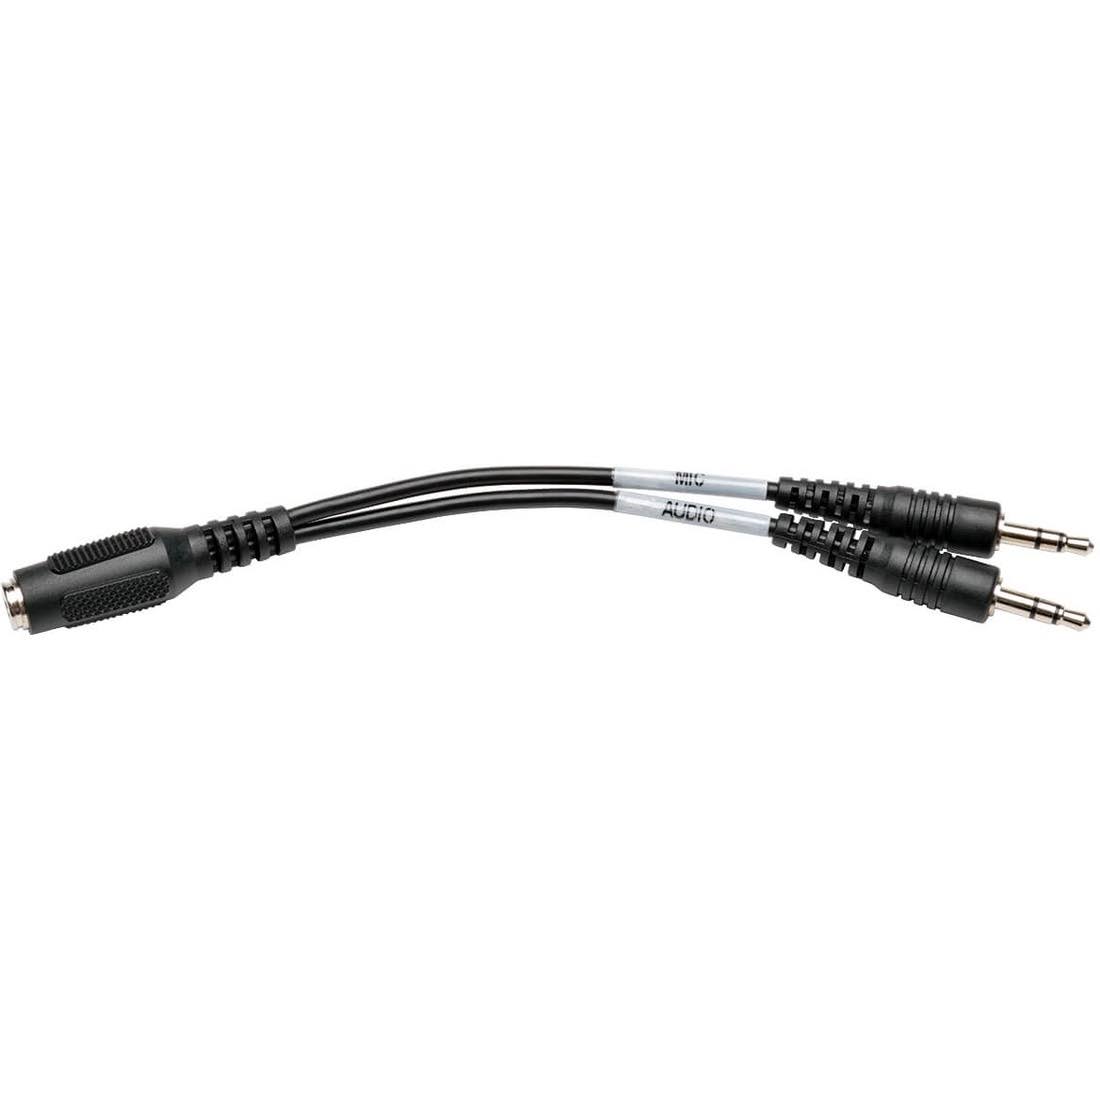 Tripp Lite 3.5mm 4-Position female To (x2) 3.5mm 3-Position Male Audio